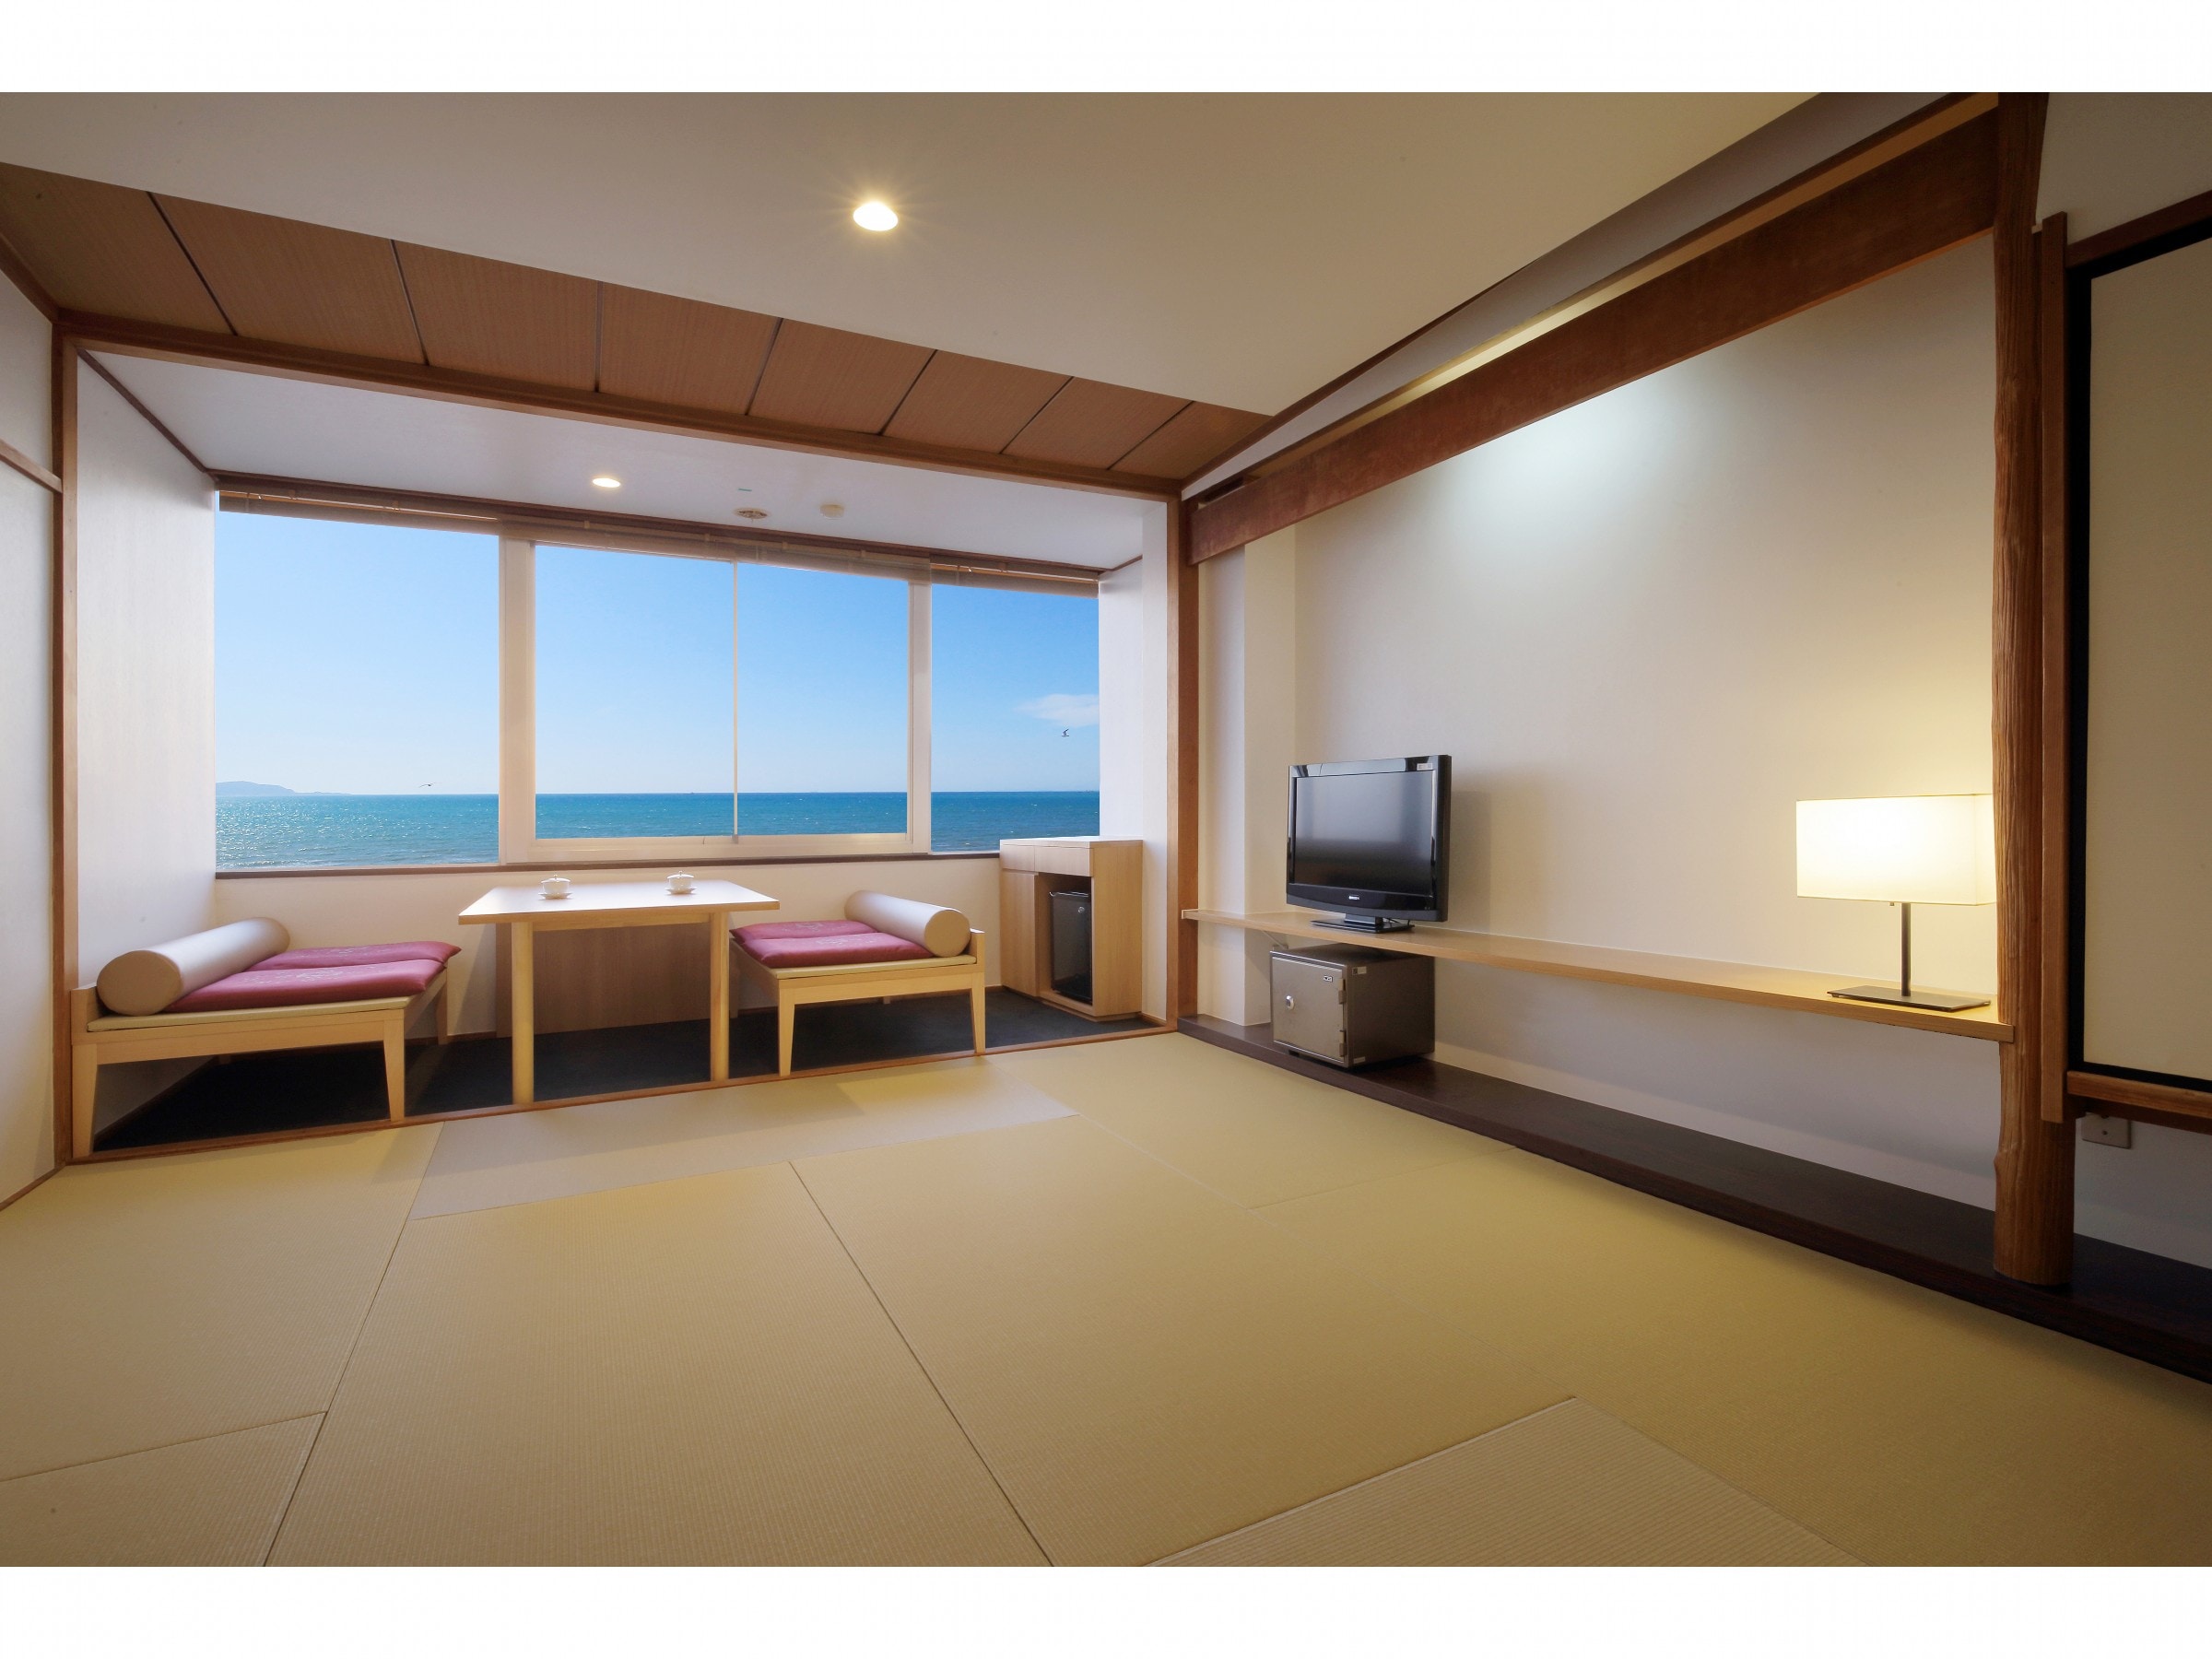 Japanese-style room with a view of the sea